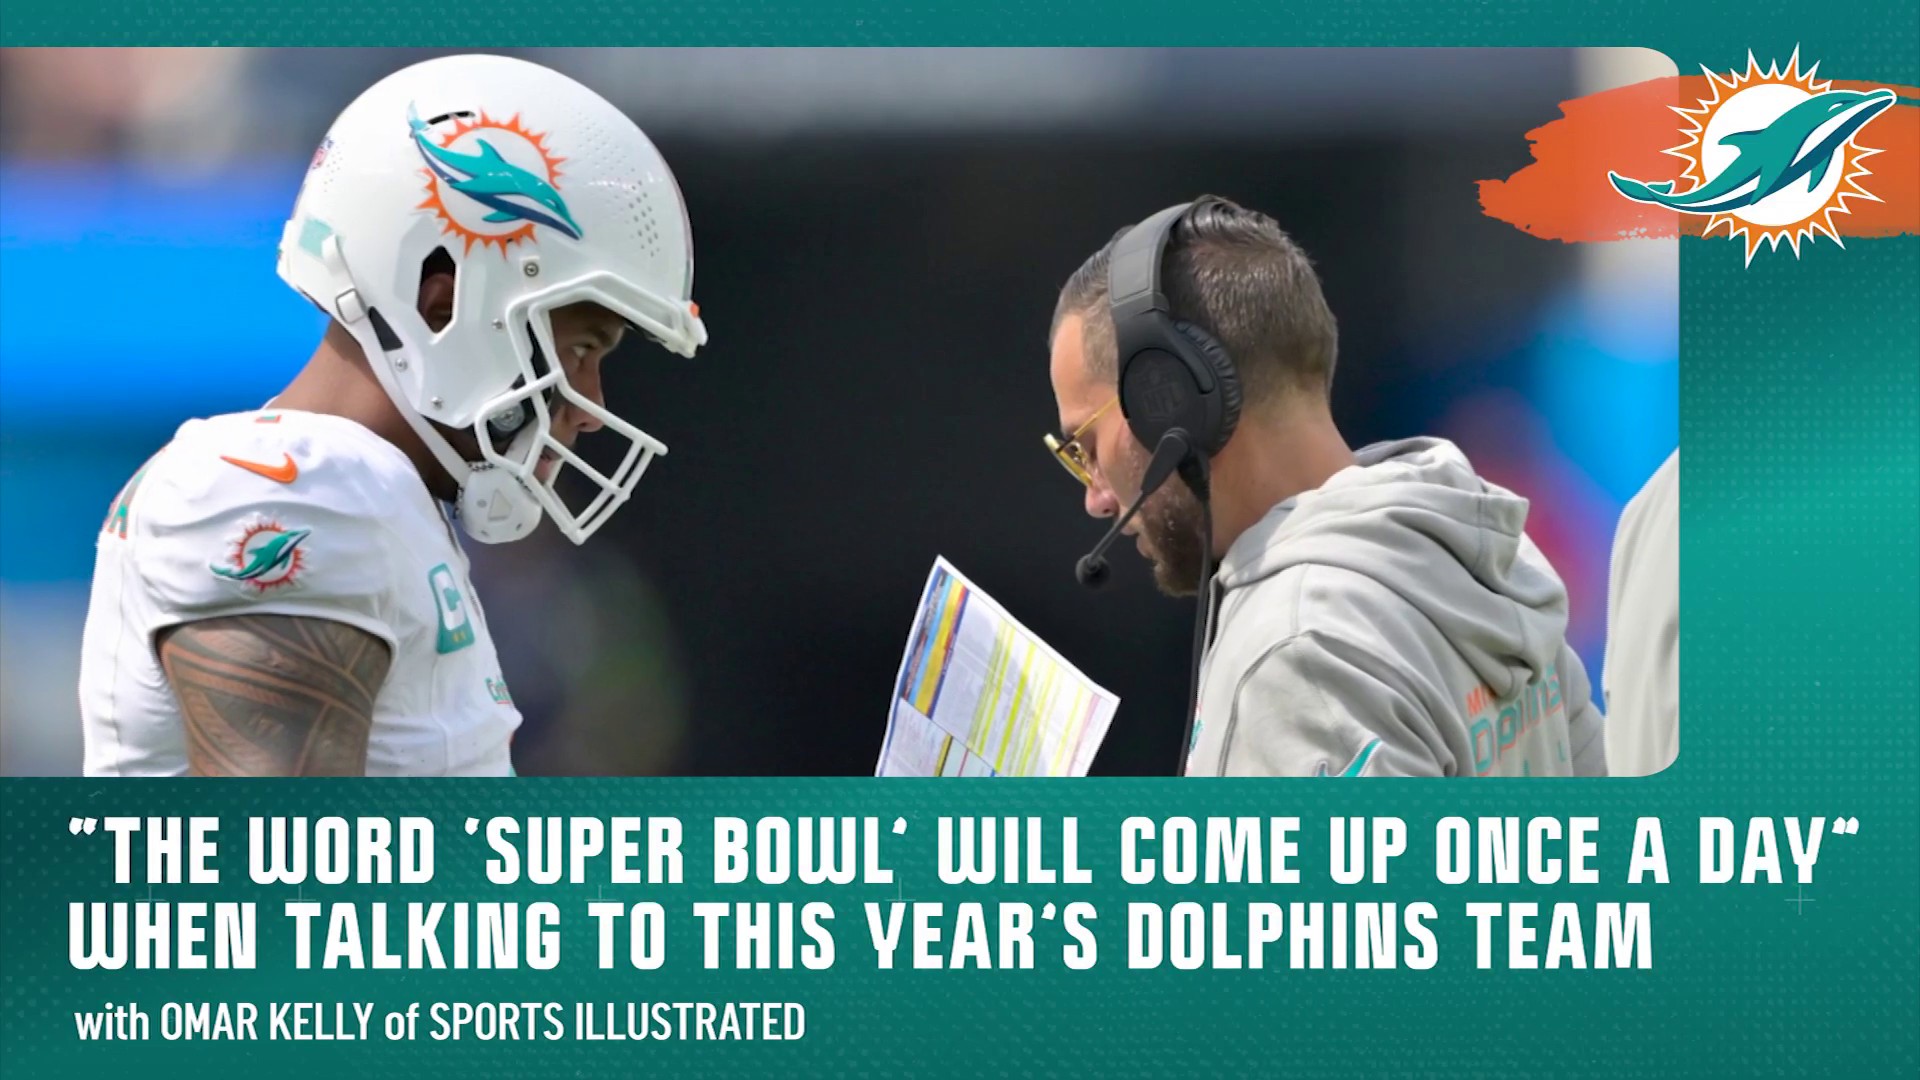 Omar Kelly Dolphins already talking daily about the Super Bowl